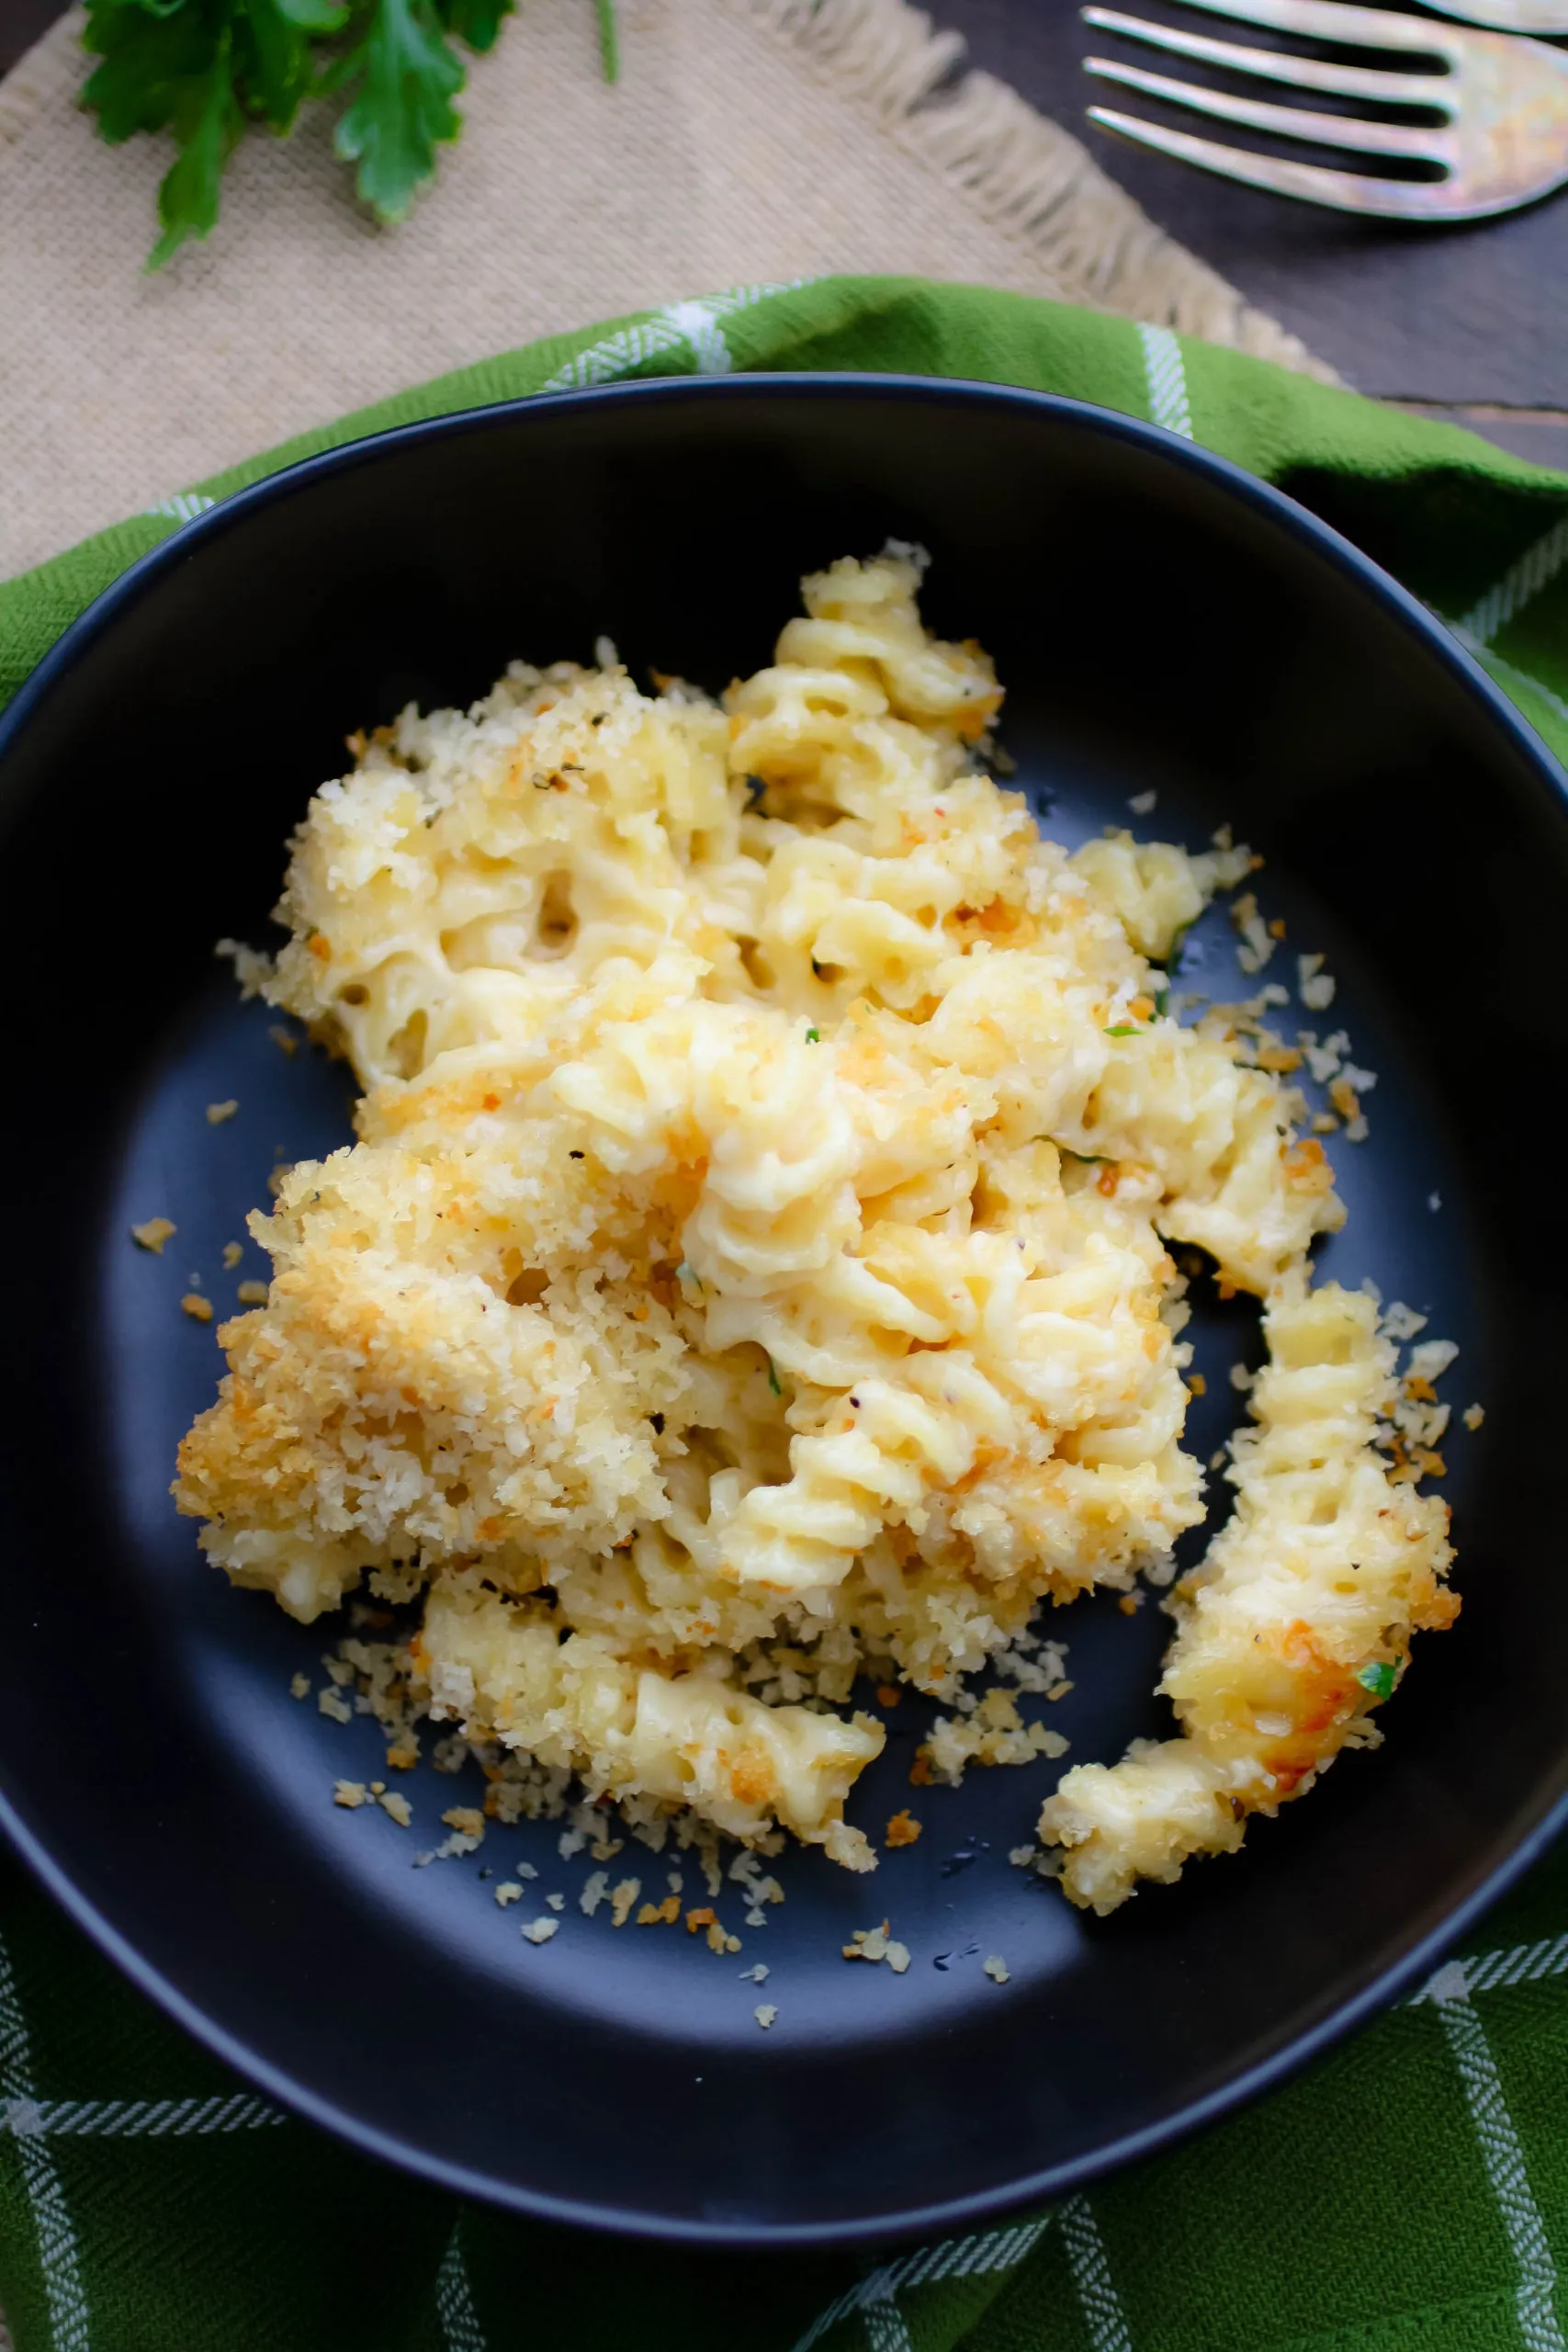 Dig into this creamy, cheesy, Baked Mac and Cheese dish as part of a wonderful meal!